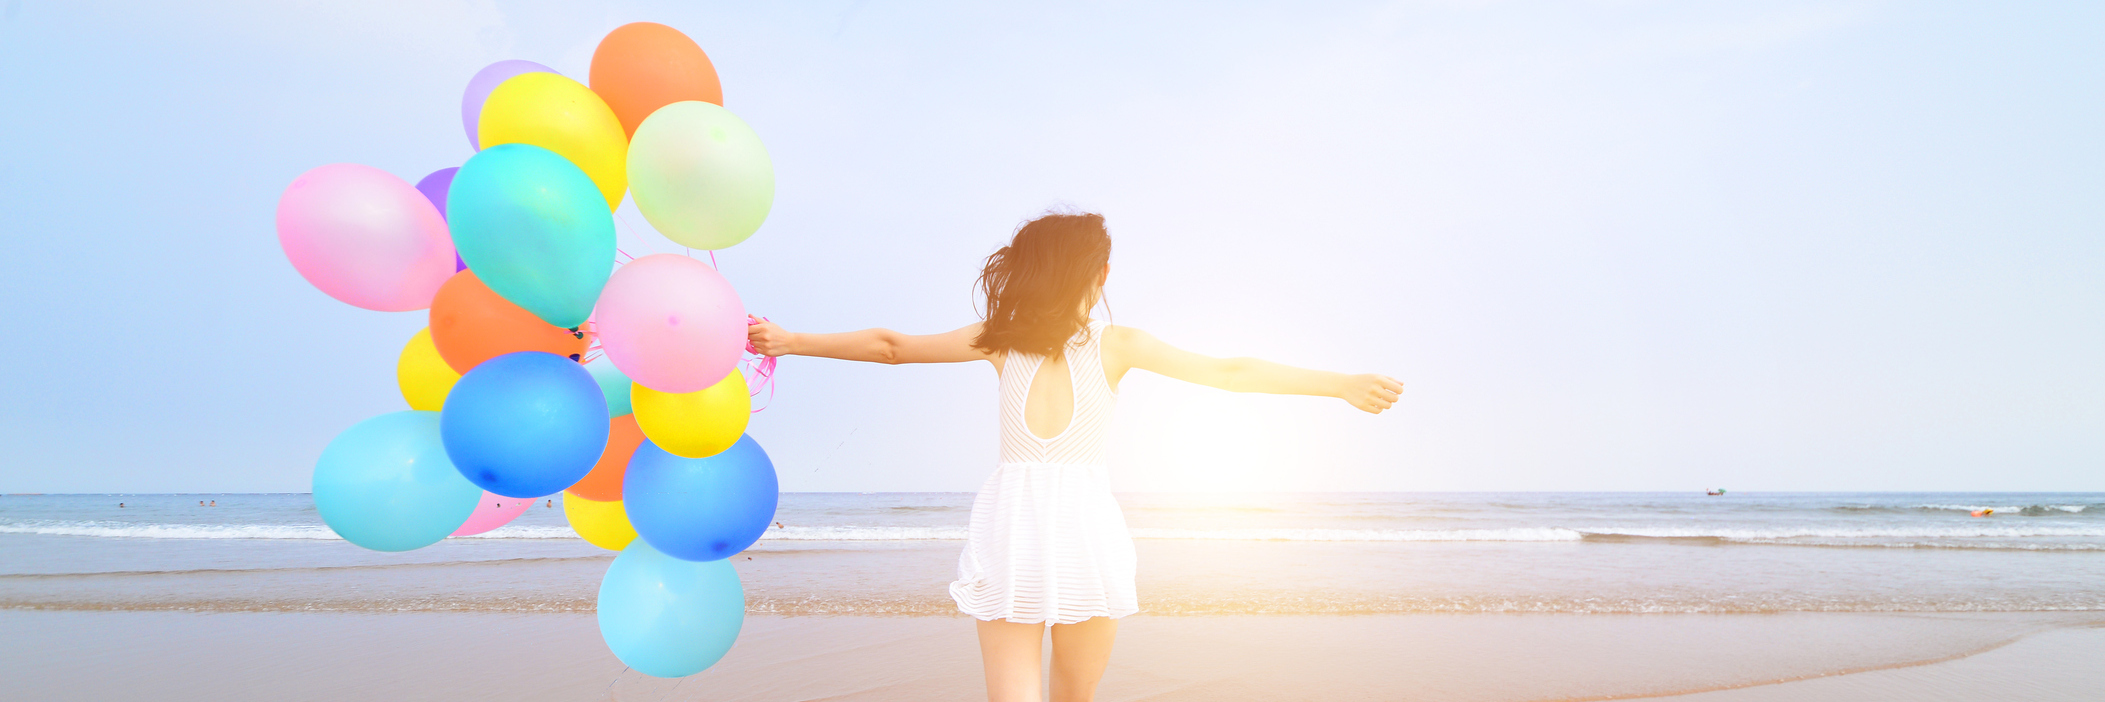 Woman at the beach, walking on the shore with vibrant balloons.